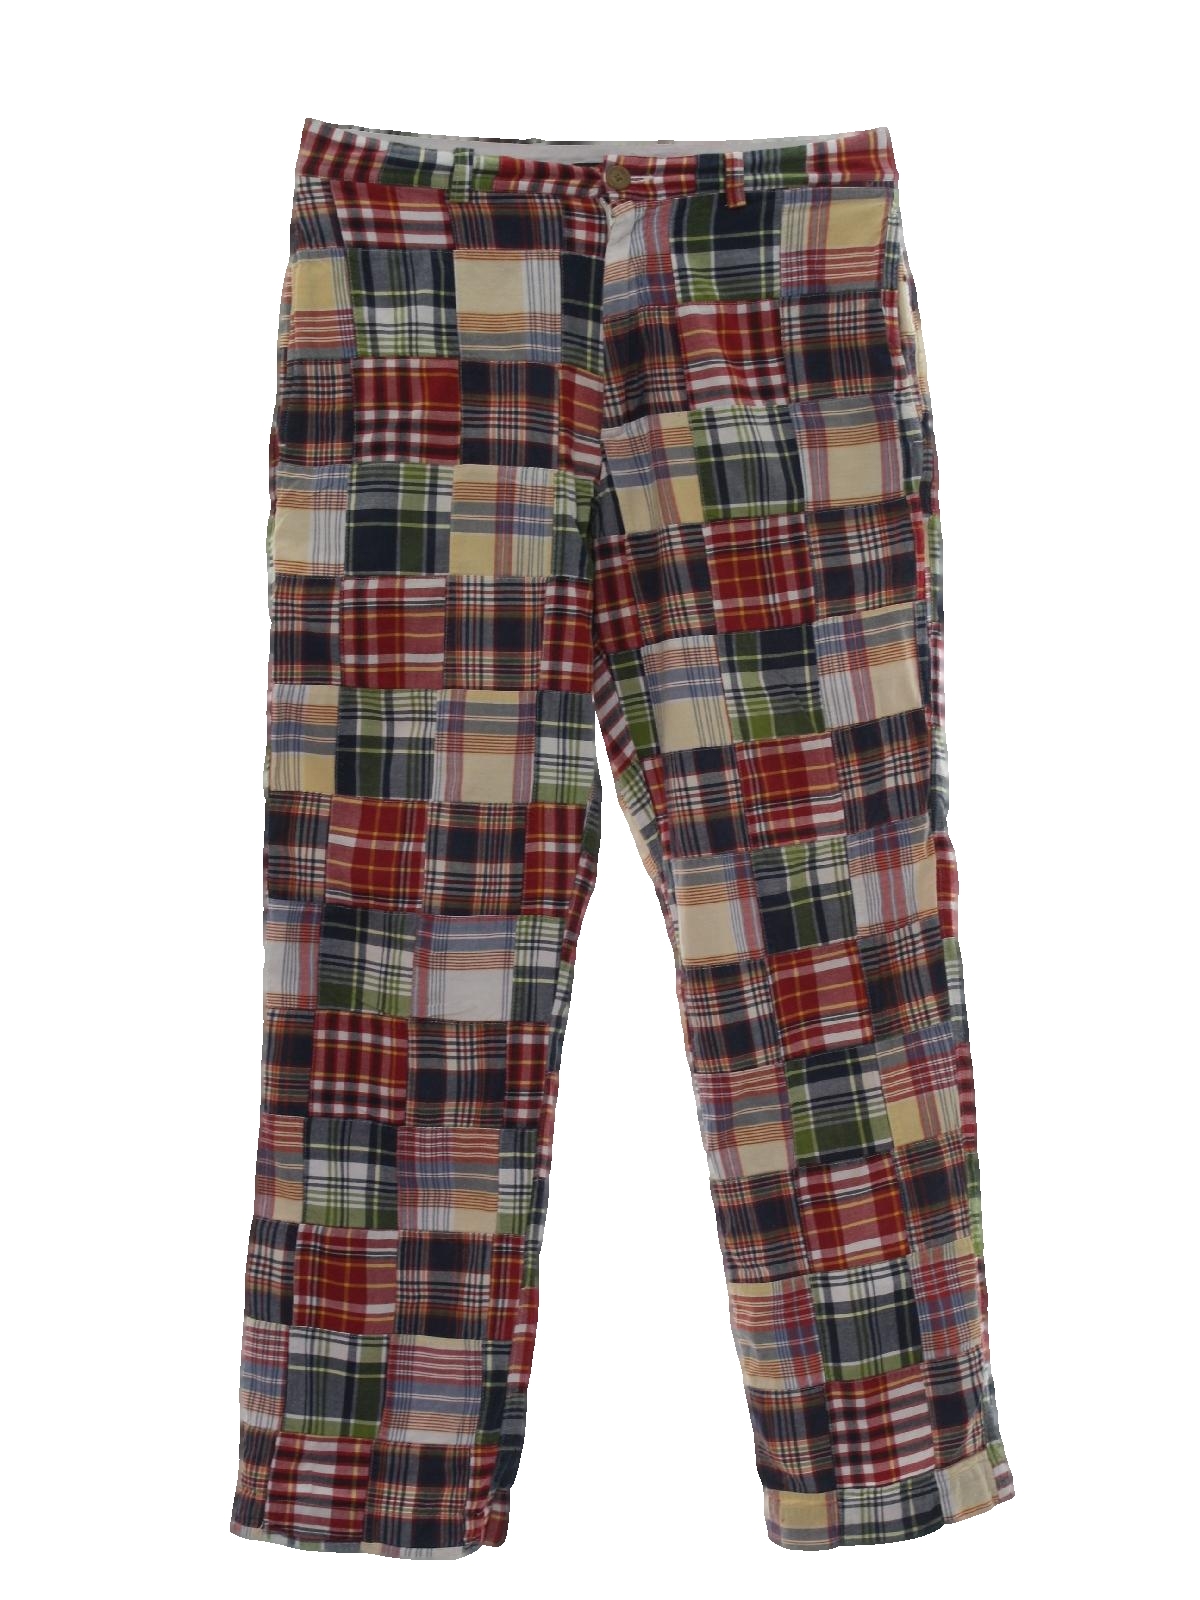 Eighties J Crew Pants: 80s -J Crew- Mens white and shades of red, blue ...